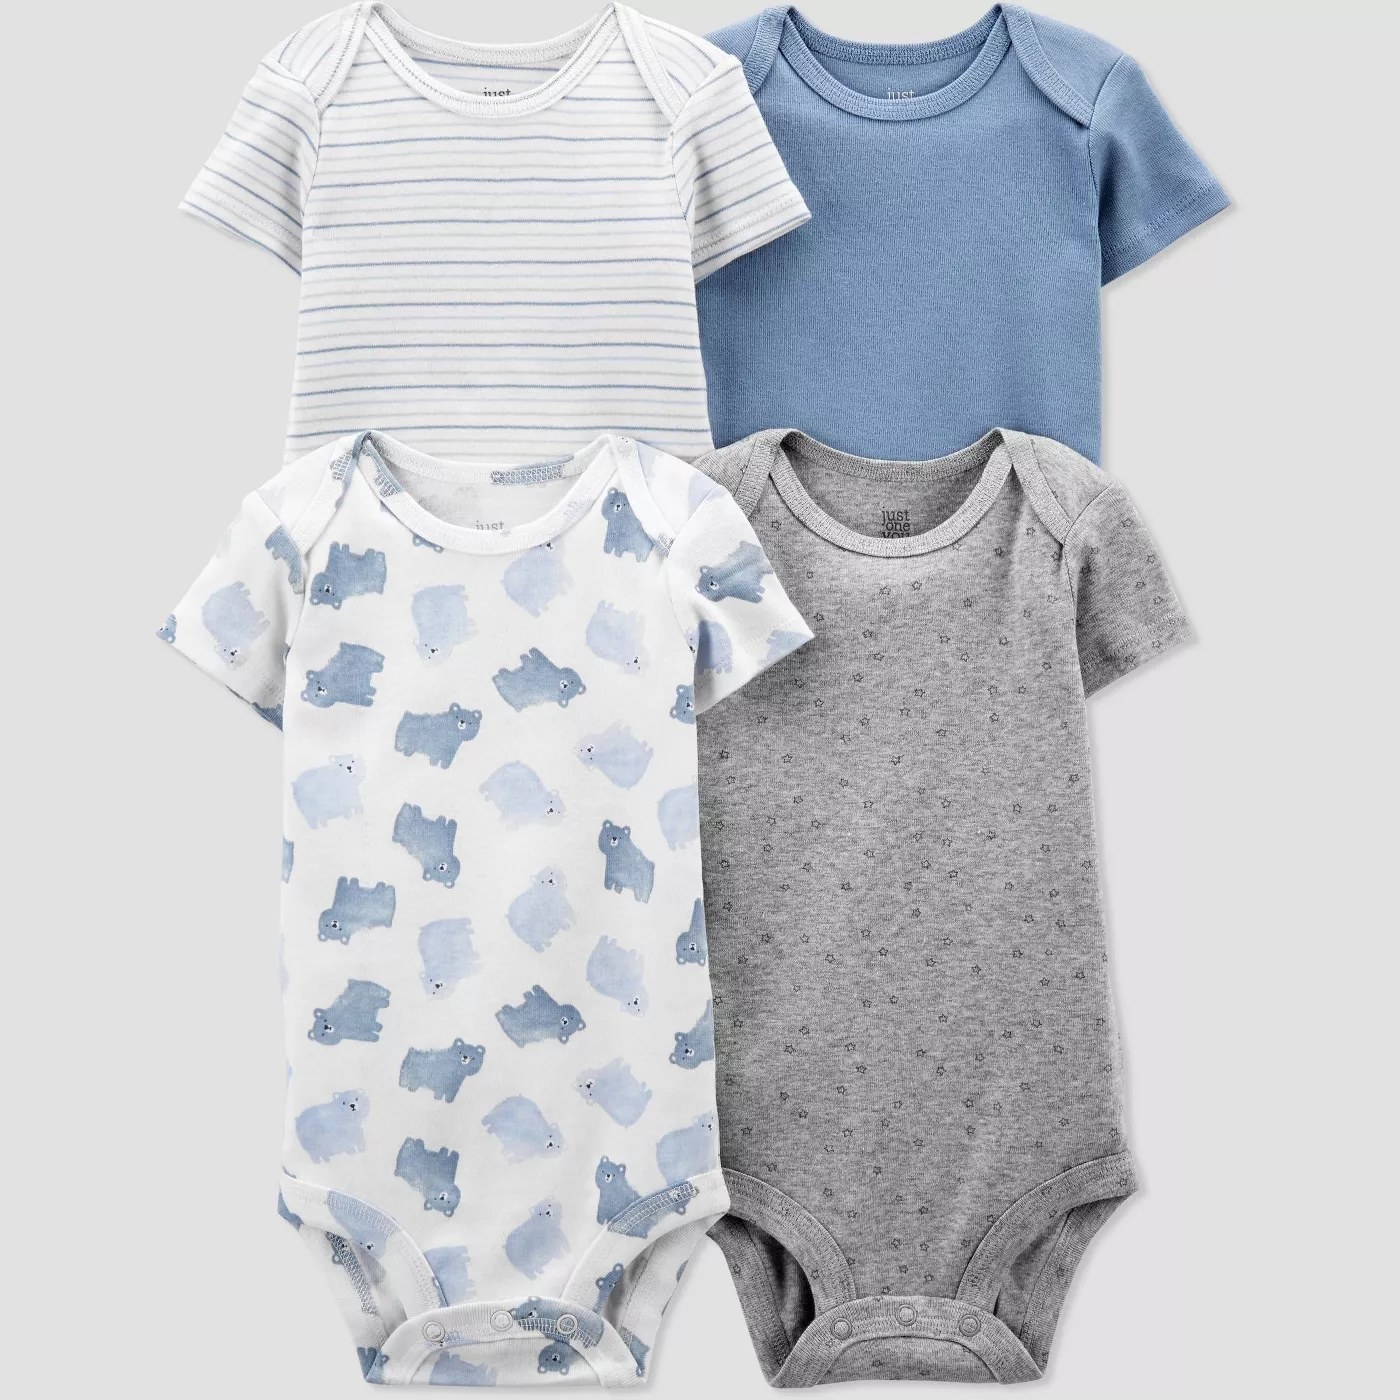 A bodysuit with a bear pattern, another in gray, another in blue, and another with stripes